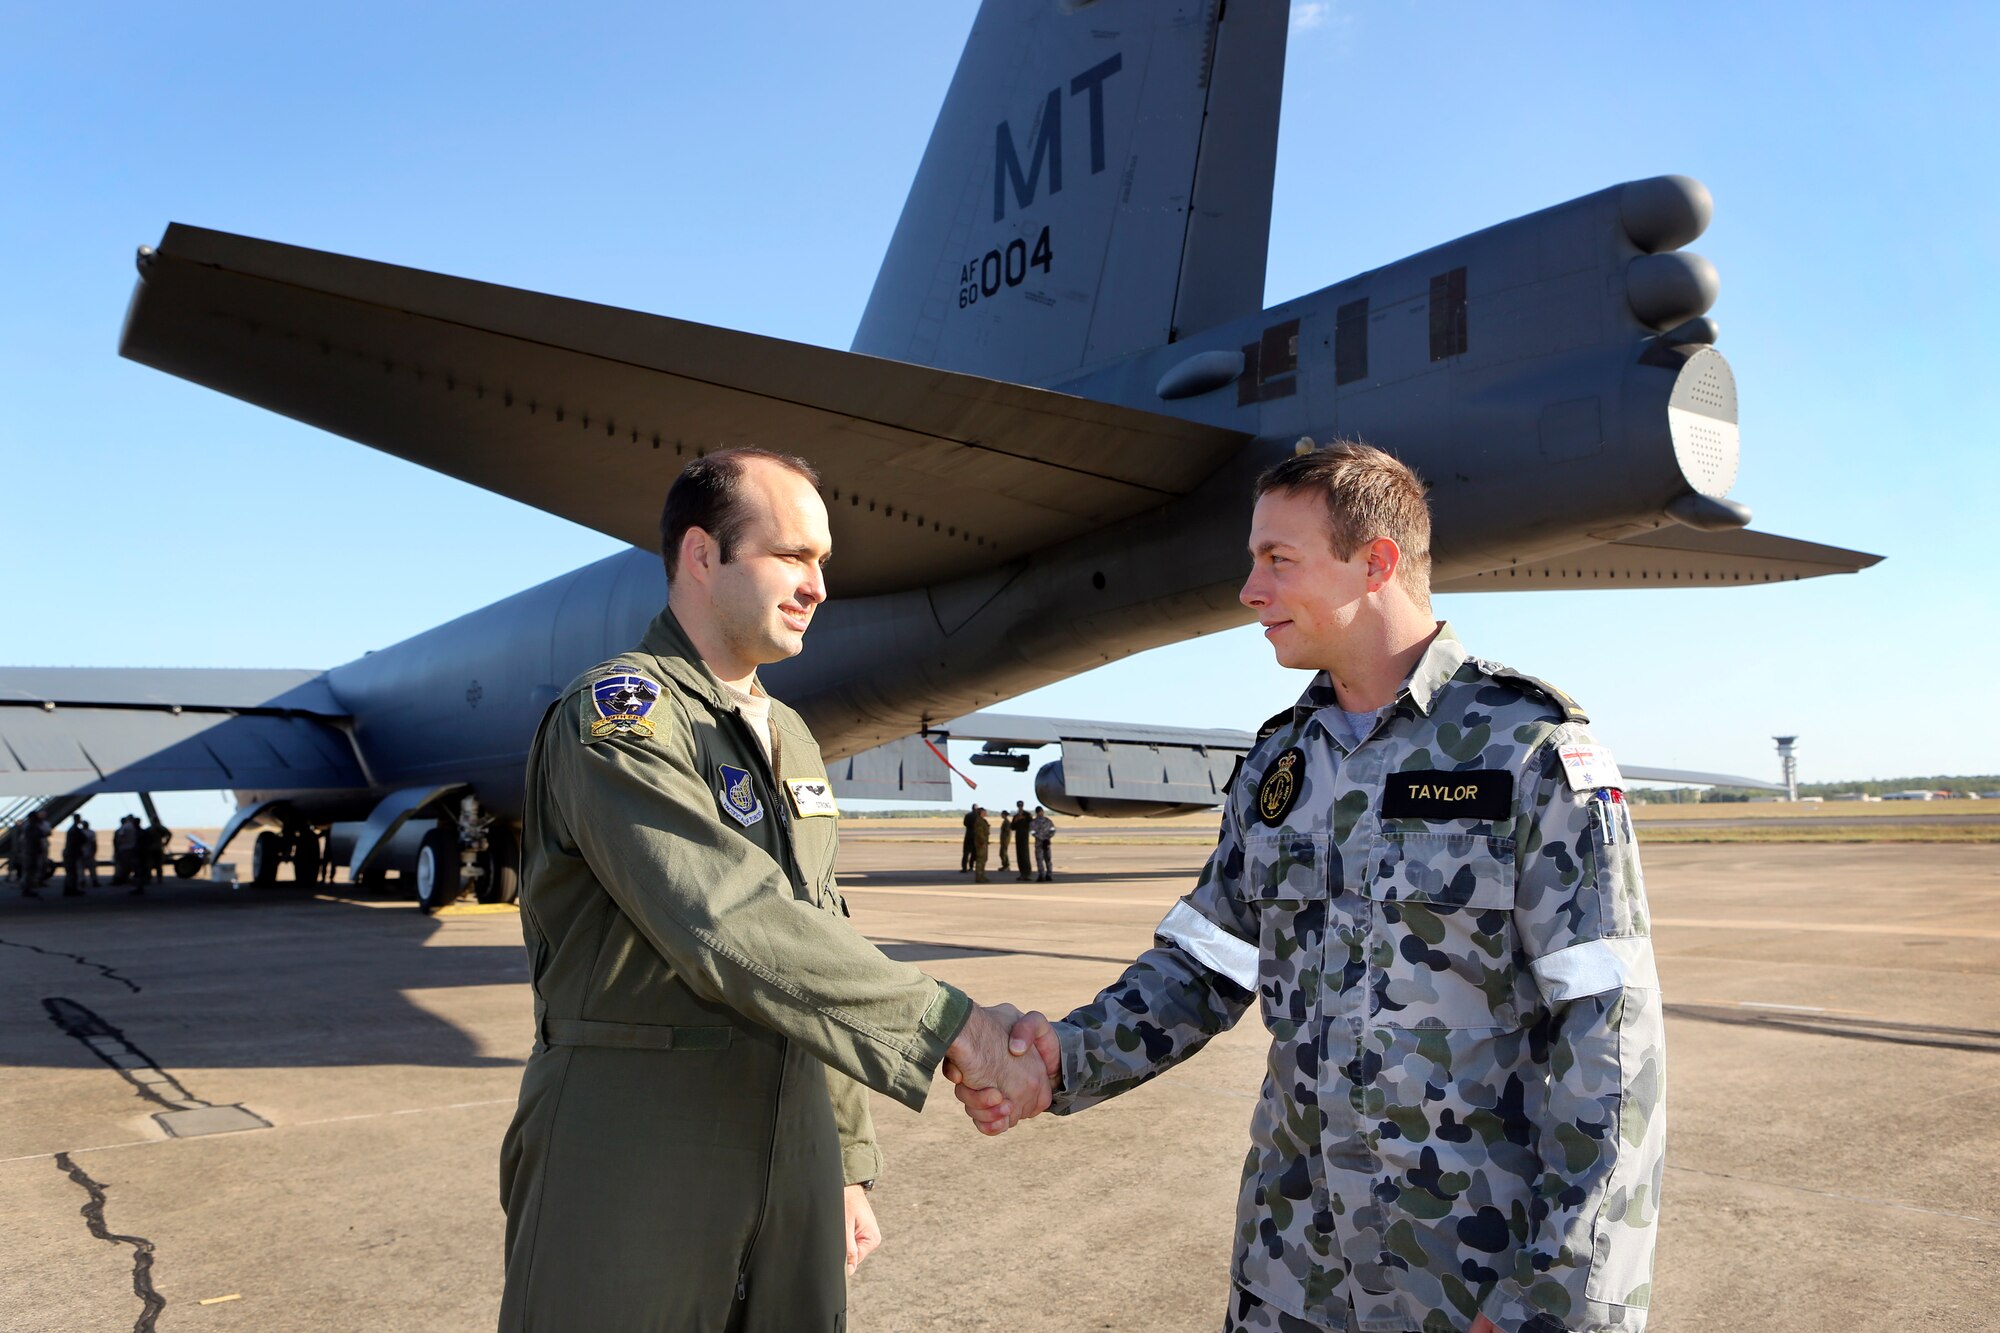 U.S. and Royal Australian Air Force members discuss capabilities of the U.S. Air Force B-52 Stratofortress bomber during a static display, June 20, 2016, Royal Australian Air Force Base Darwin, Australia. The U.S. aircraft and crew were in the region as part of U.S. Pacific Command’s Continuous Bomber Presence operations designed to demonstrate U.S. commitment to the Indo-Asia-Pacific Region and enhance regional security. (Royal Australian Air Force photo by Cpl. Craig Barrett/Released)